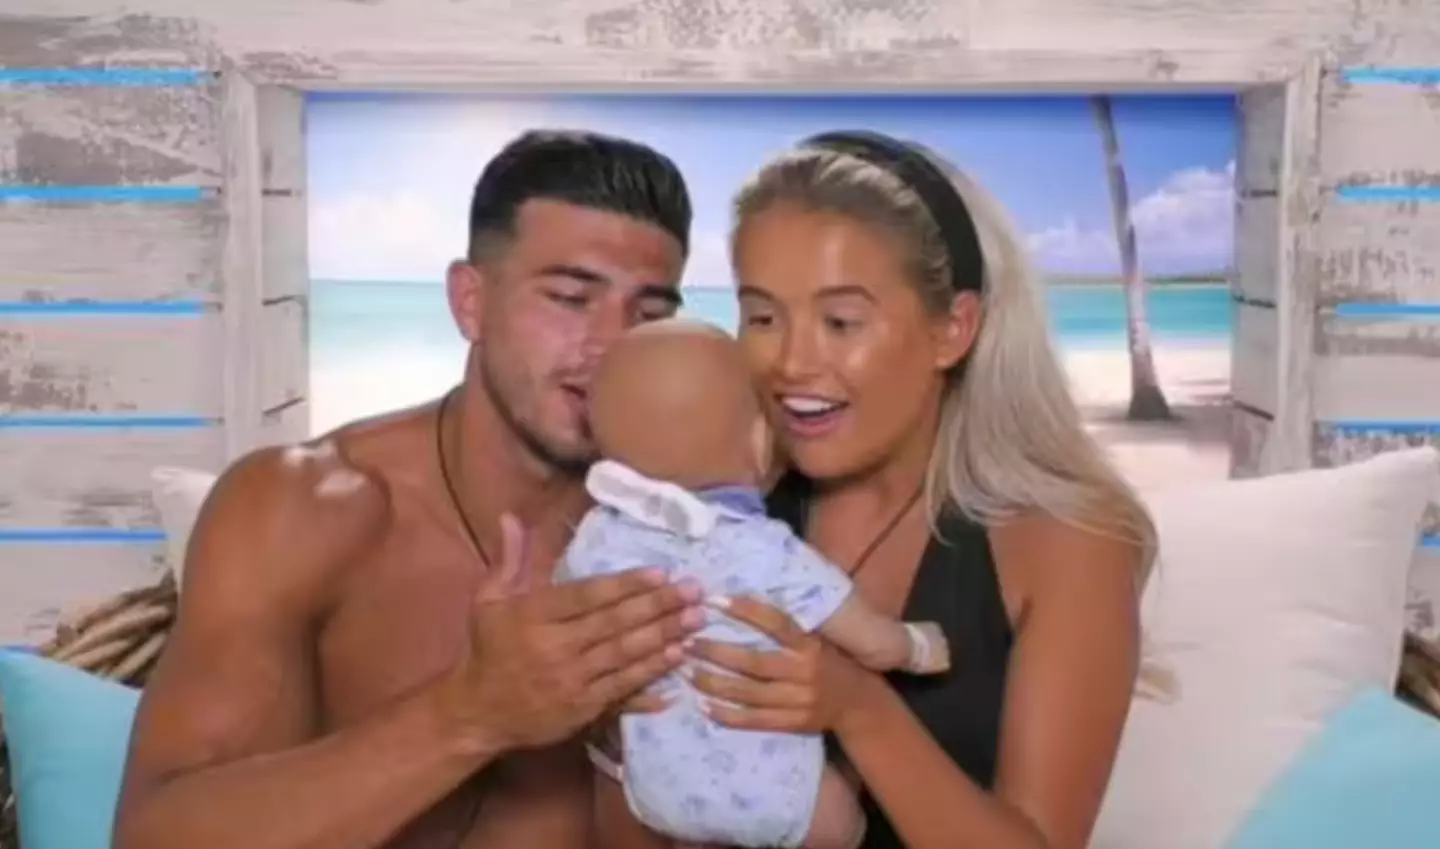 Love Island's baby challenge has allegedly been axed for the first time in nearly a decade.